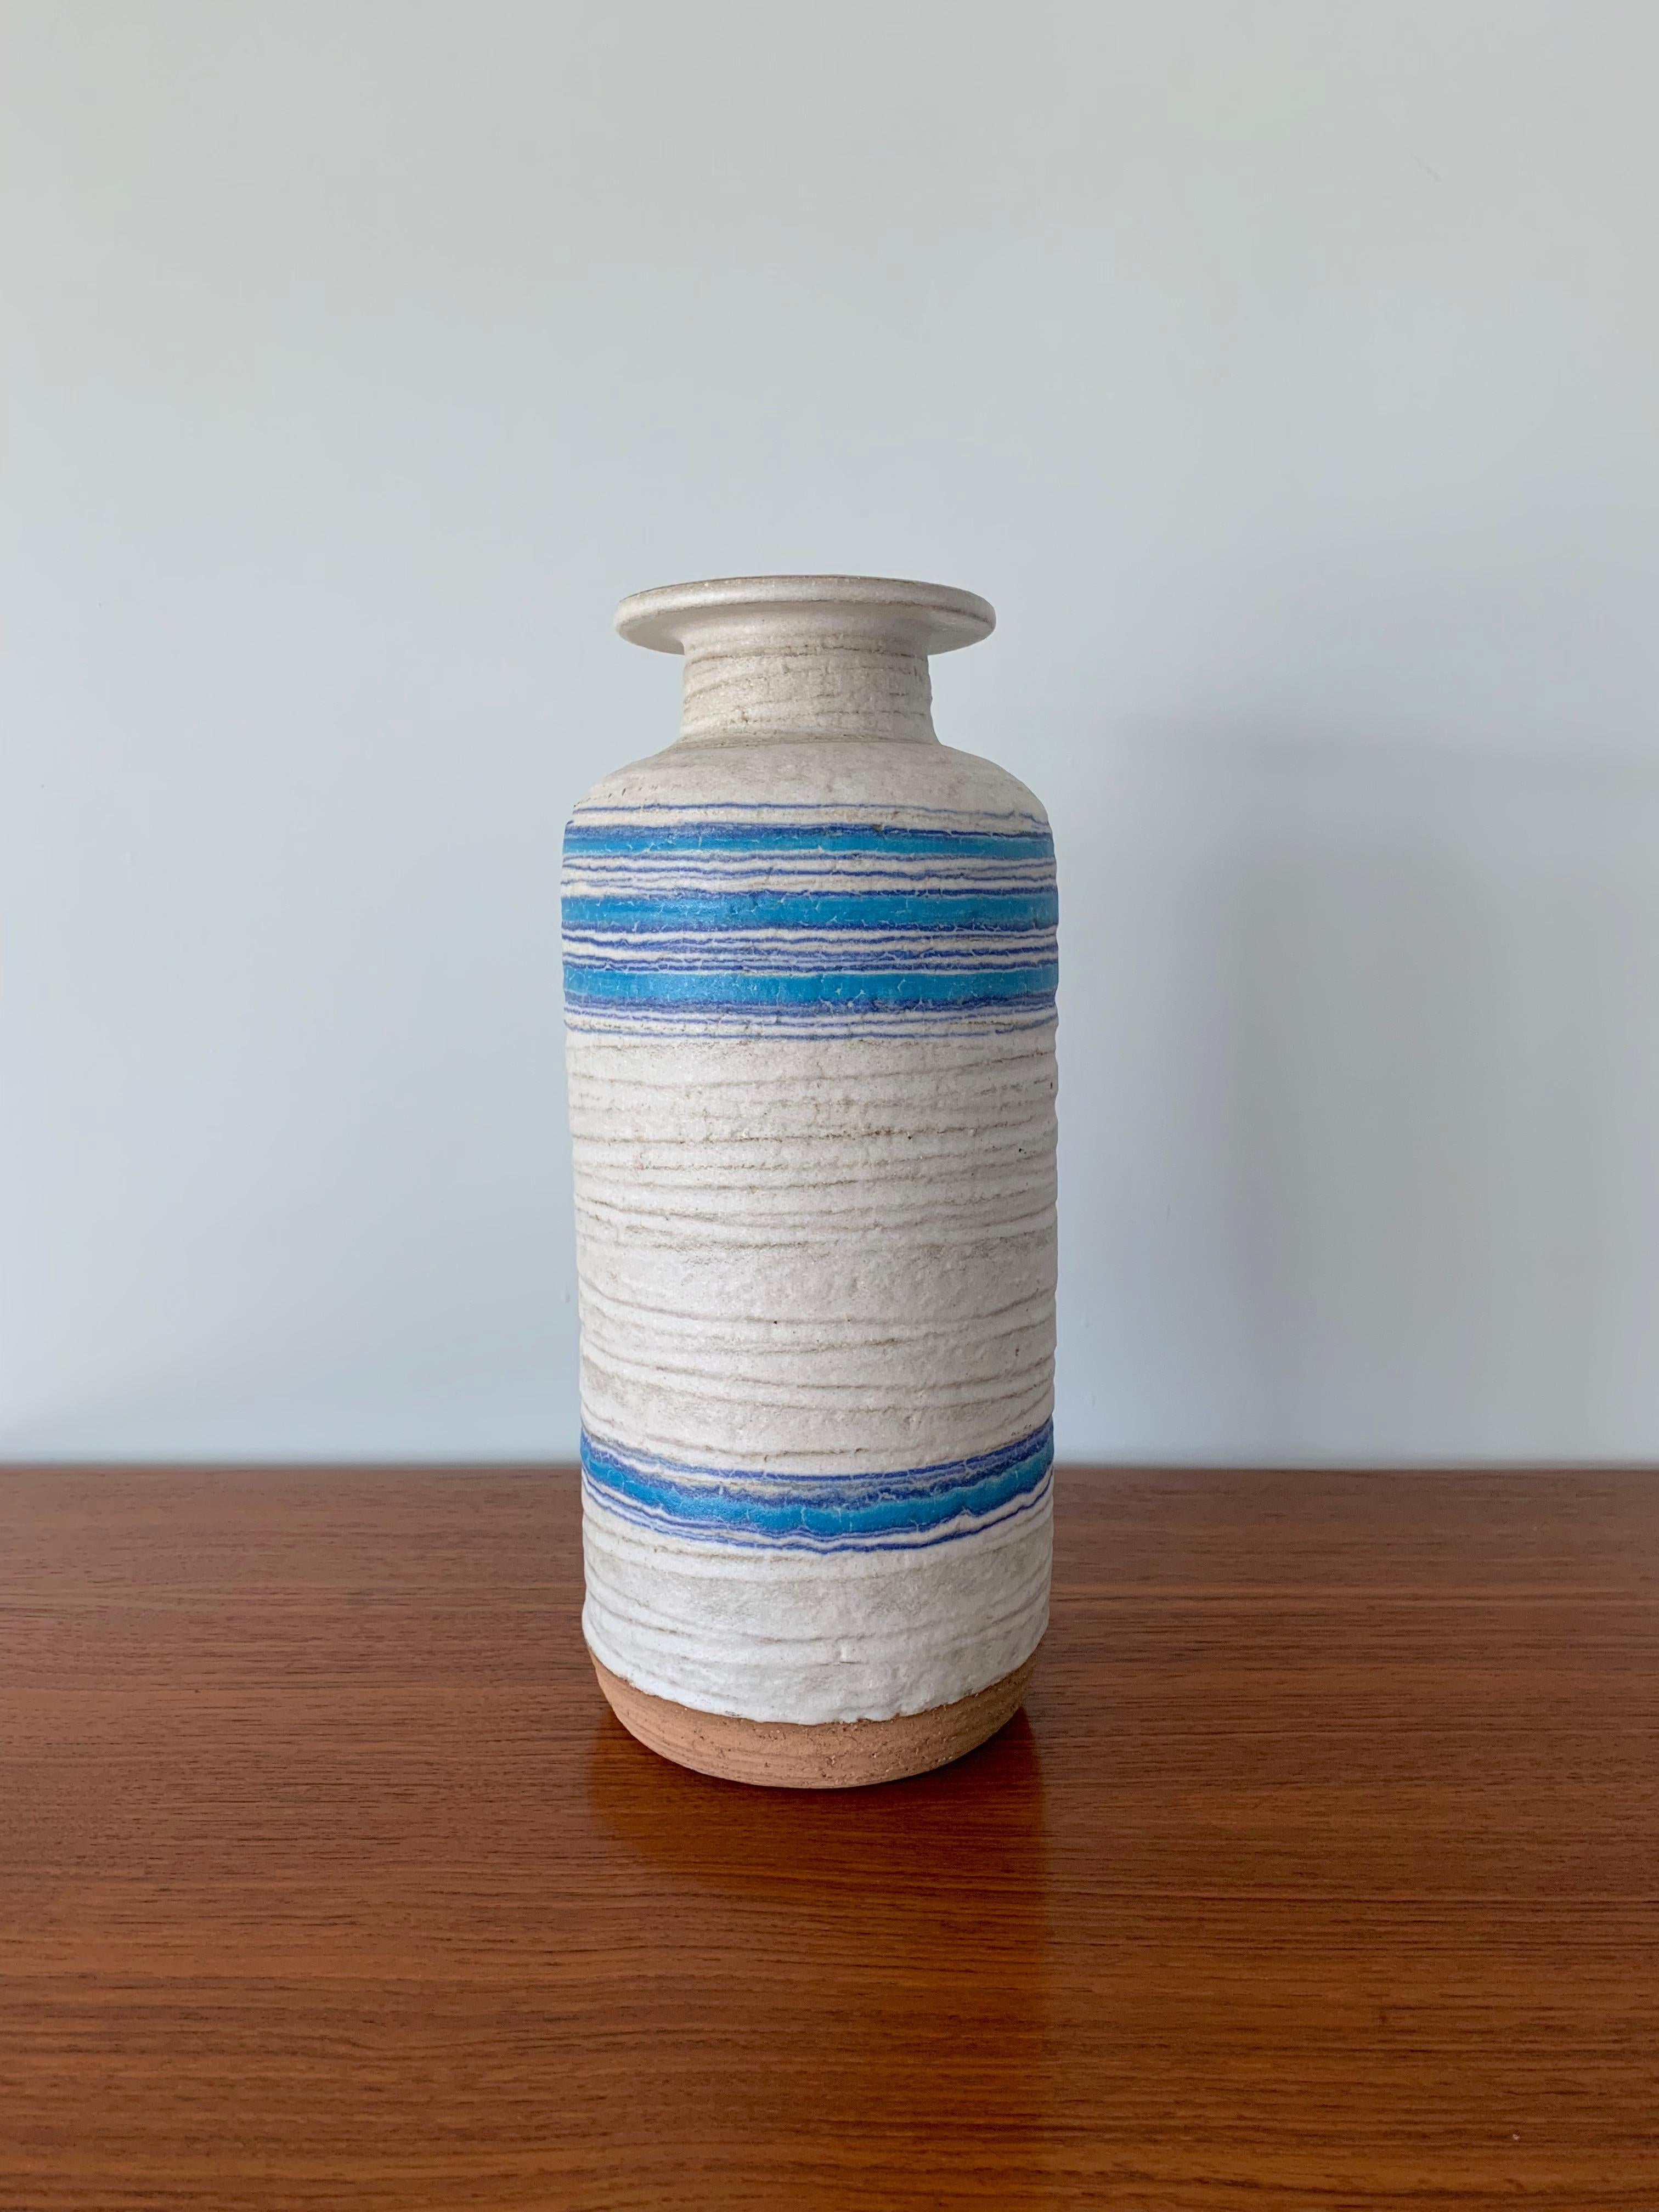 Large ceramic vase by Bitossi for Rosenthal Netter.
Thick off-white and blue glaze in the manner of Guido Gambone,
circa 1960.
Labeled.
Mint condition.